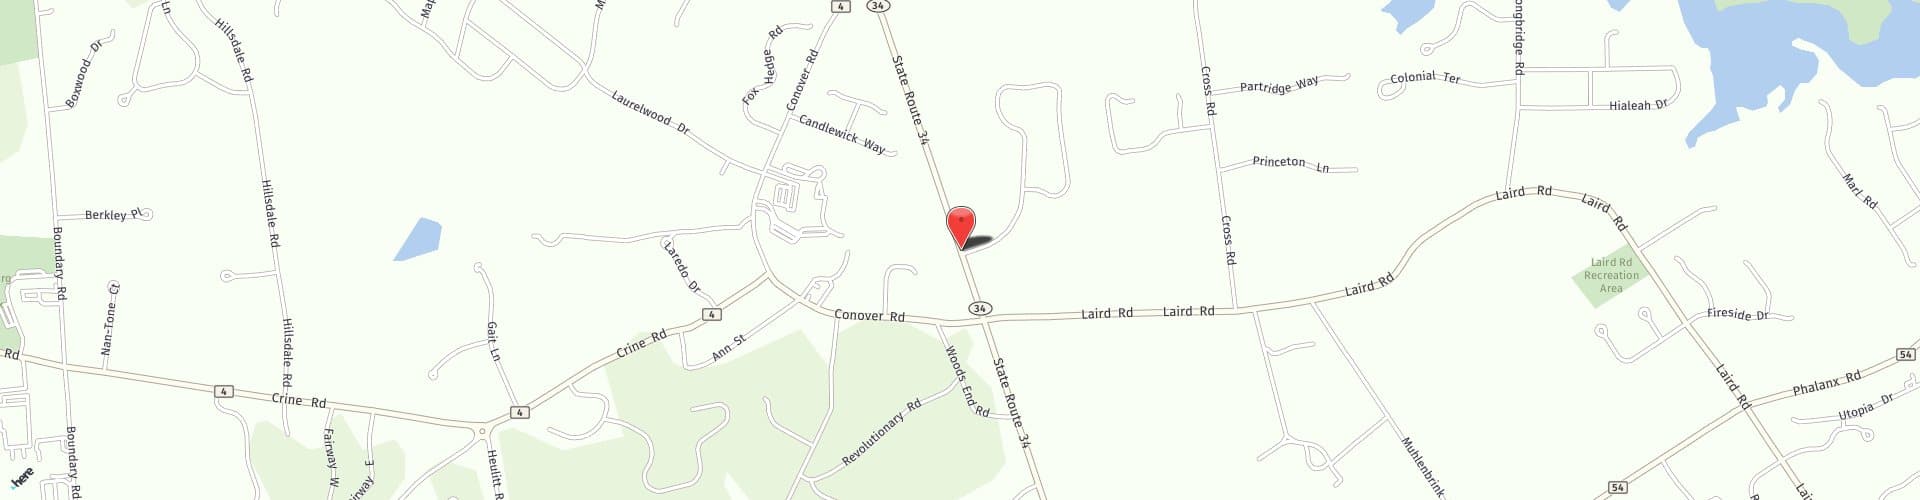 Location Map: 780 State Route 34 Colts Neck, NJ 07722